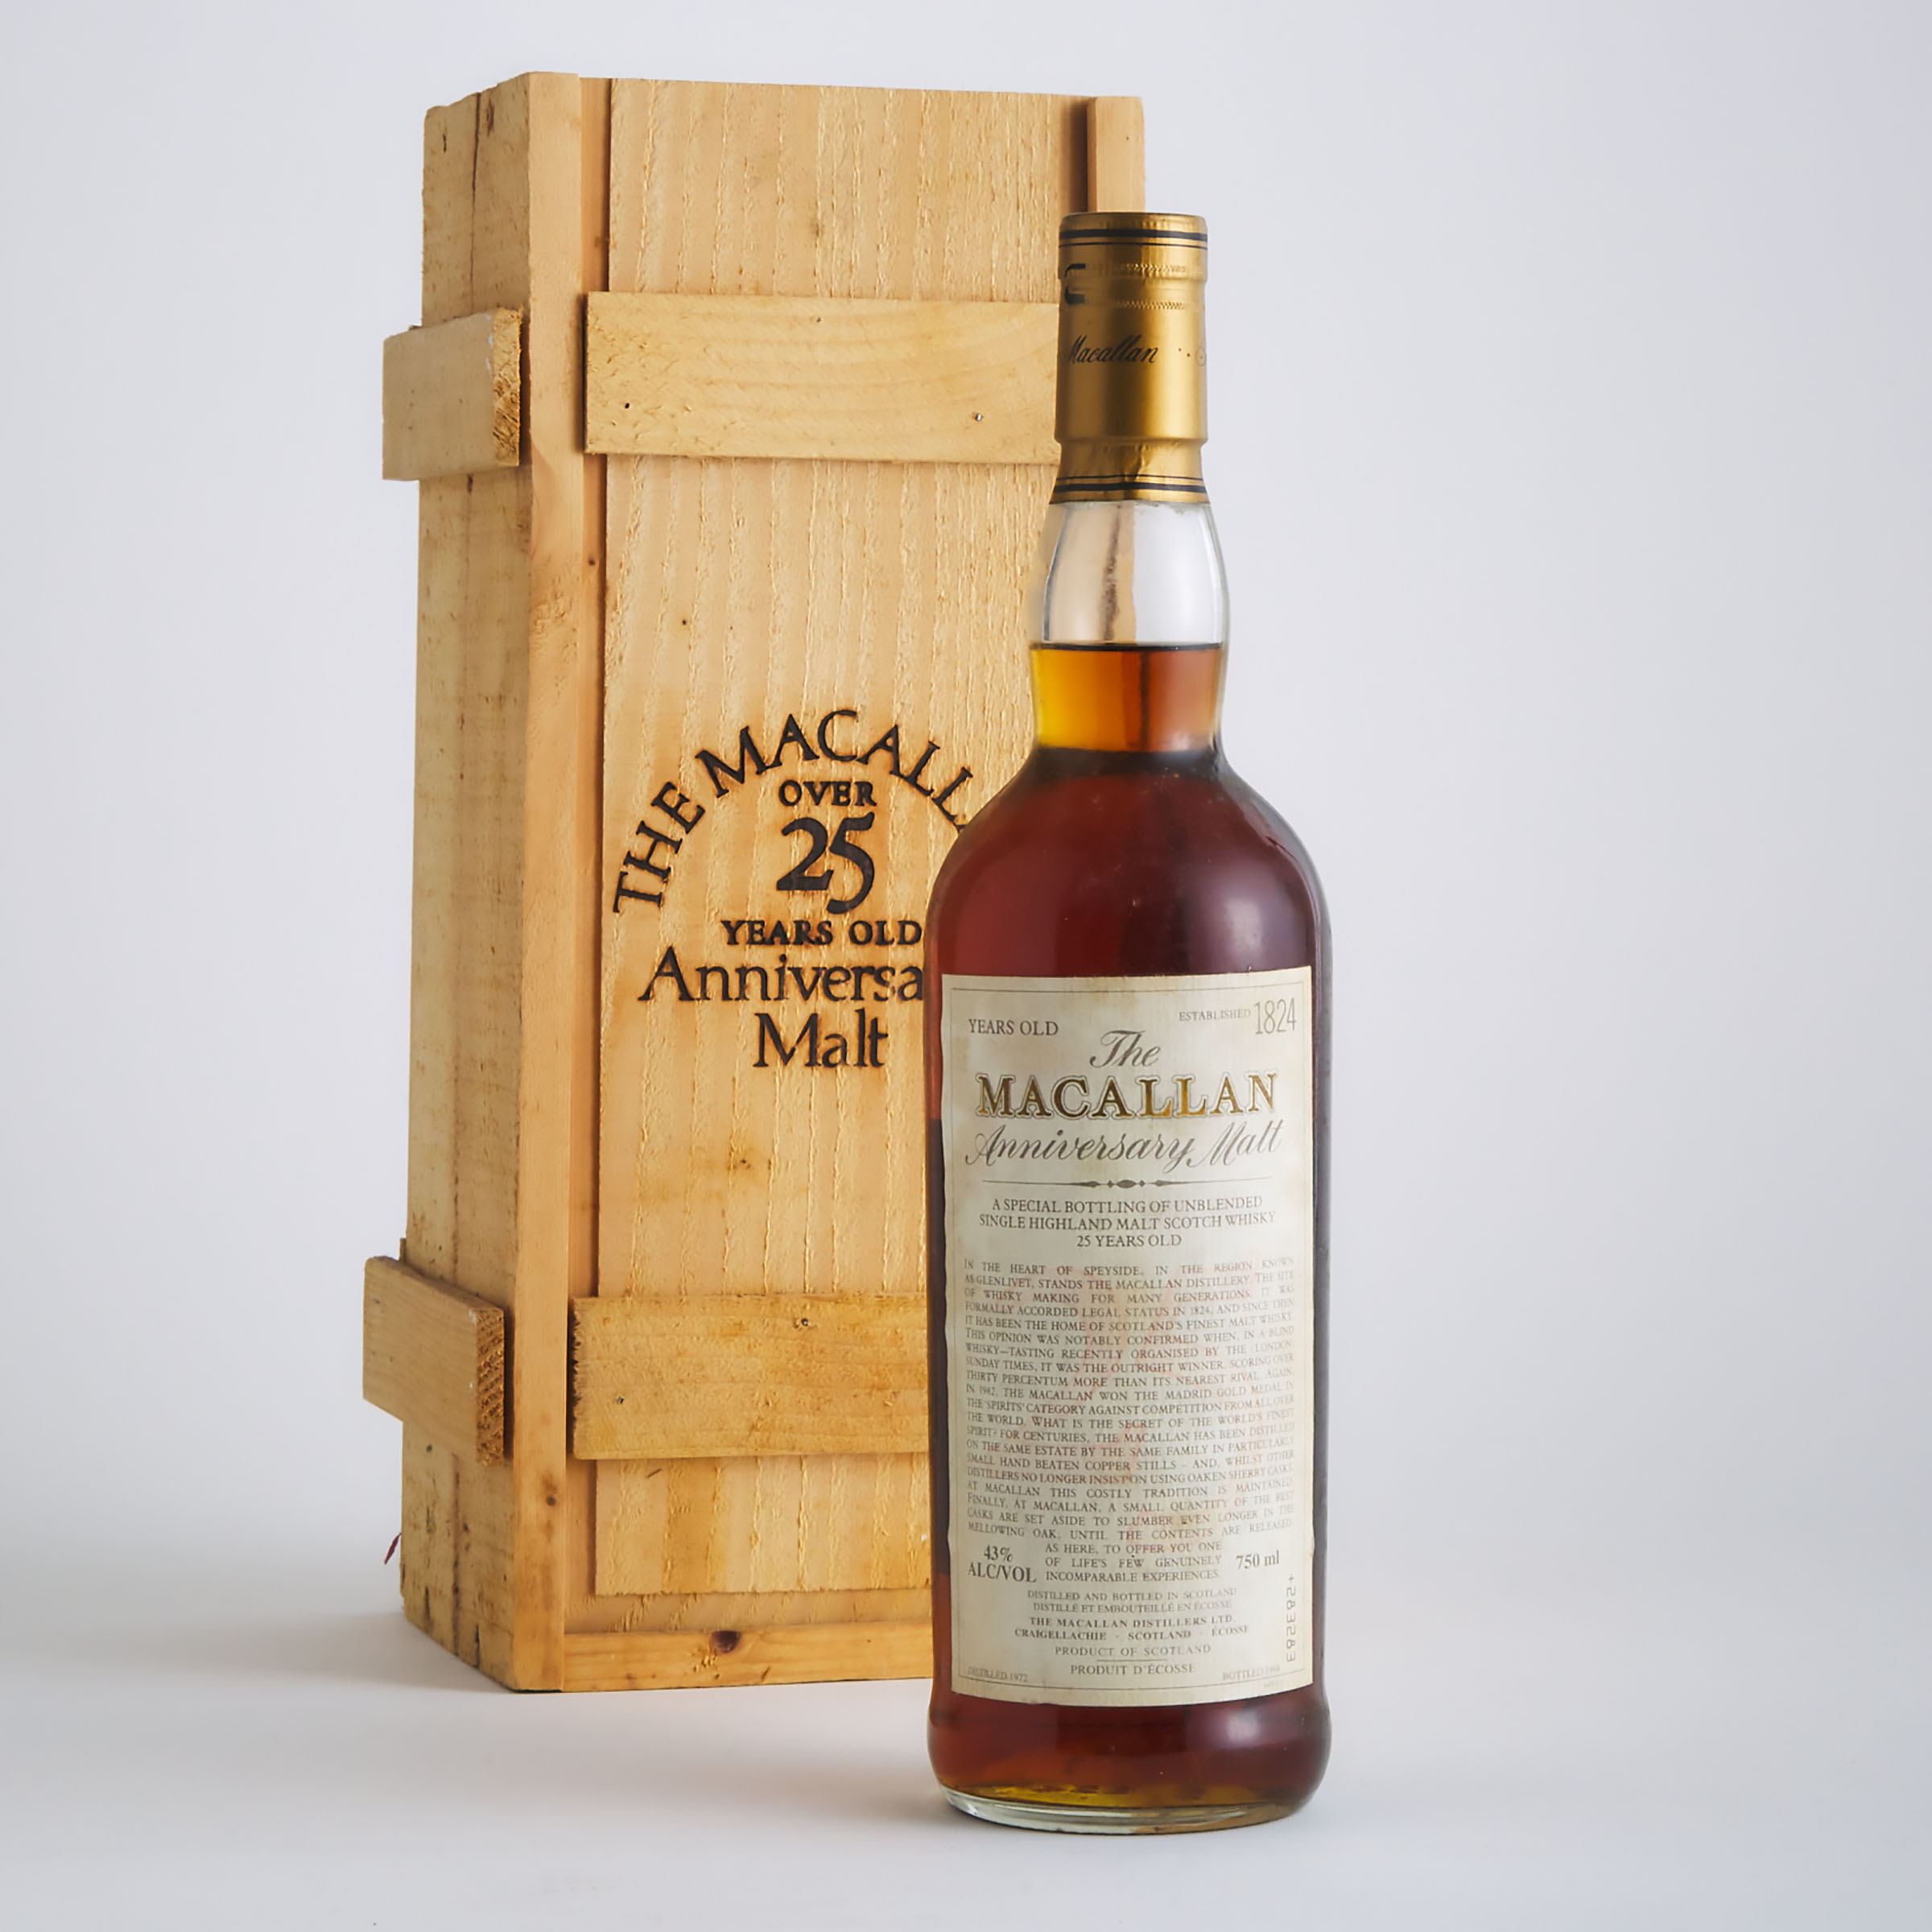 THE MACALLAN 25 YEAR ANNIVERSARY SINGLE HIGHLAND AND MALT SCOTCH WHISKY 25 YEARS (ONE 750 ML)